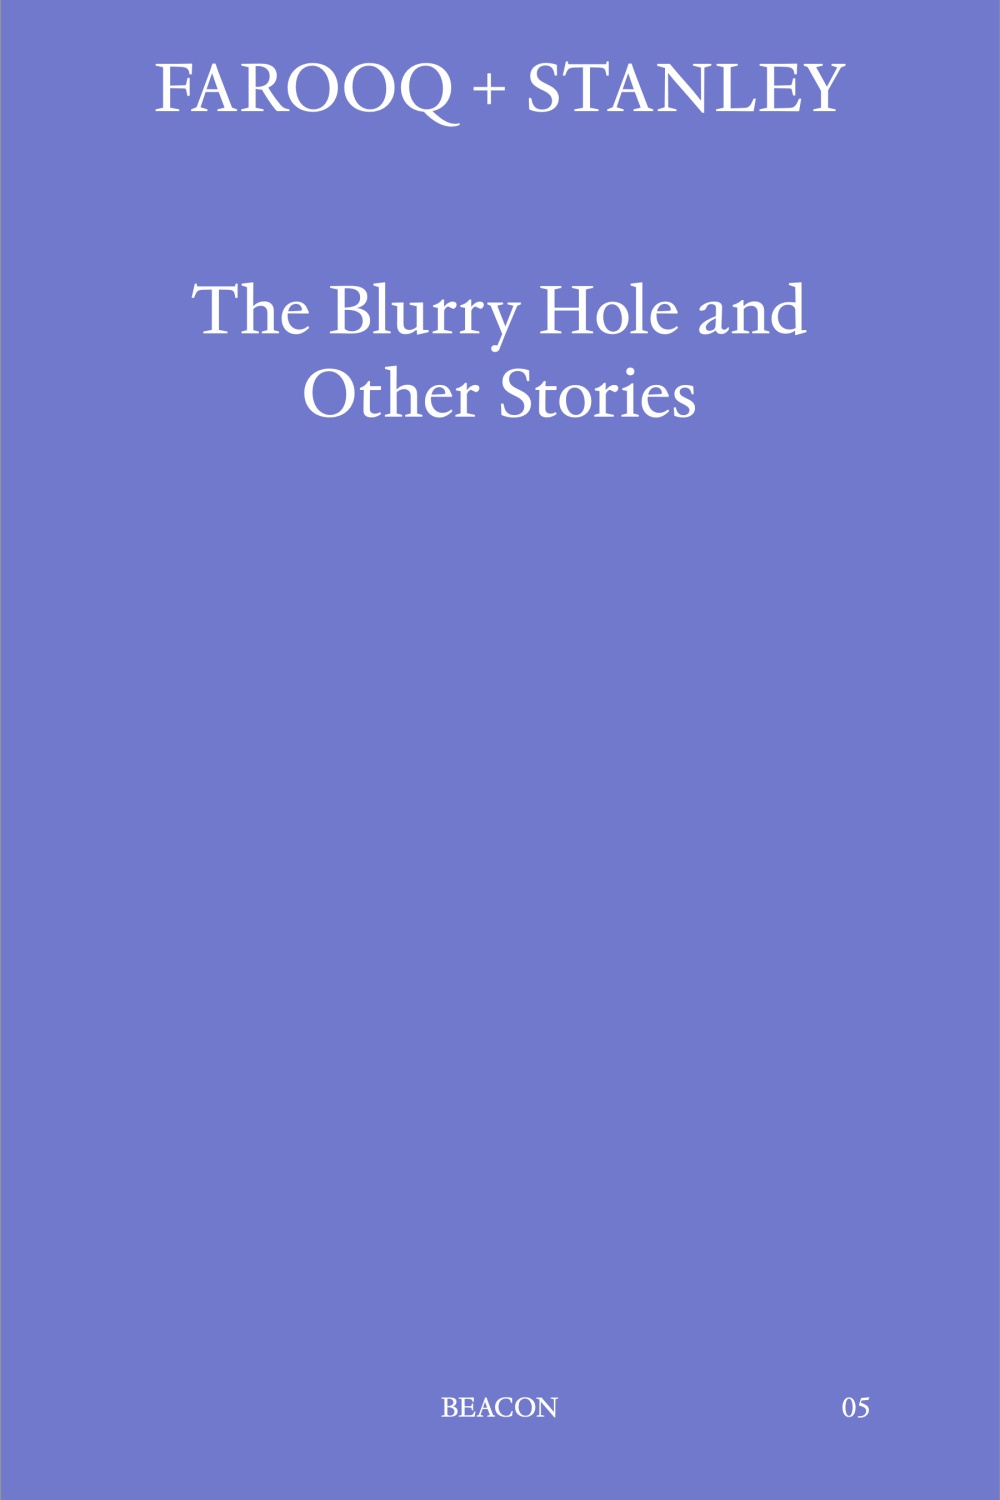 The Blurry Hole and Other Stories